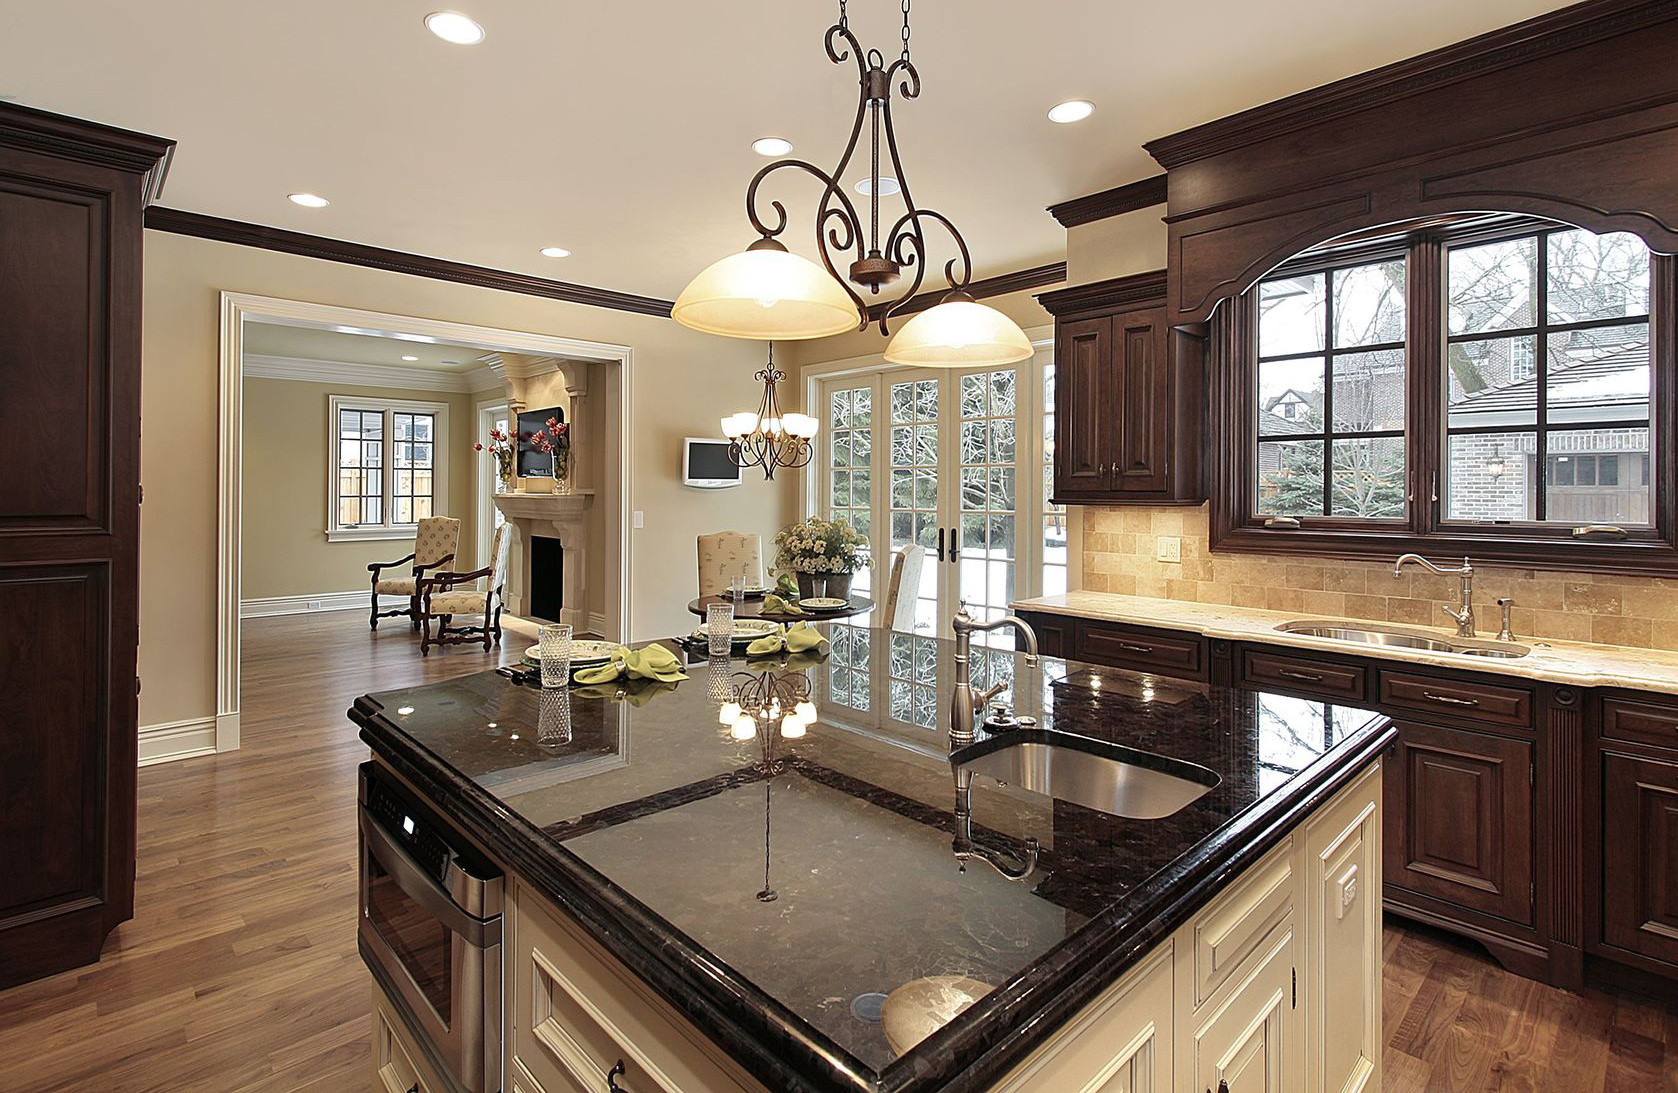 Kitchen Granite Countertop
 How to Select the Right Granite for Your Kitchen